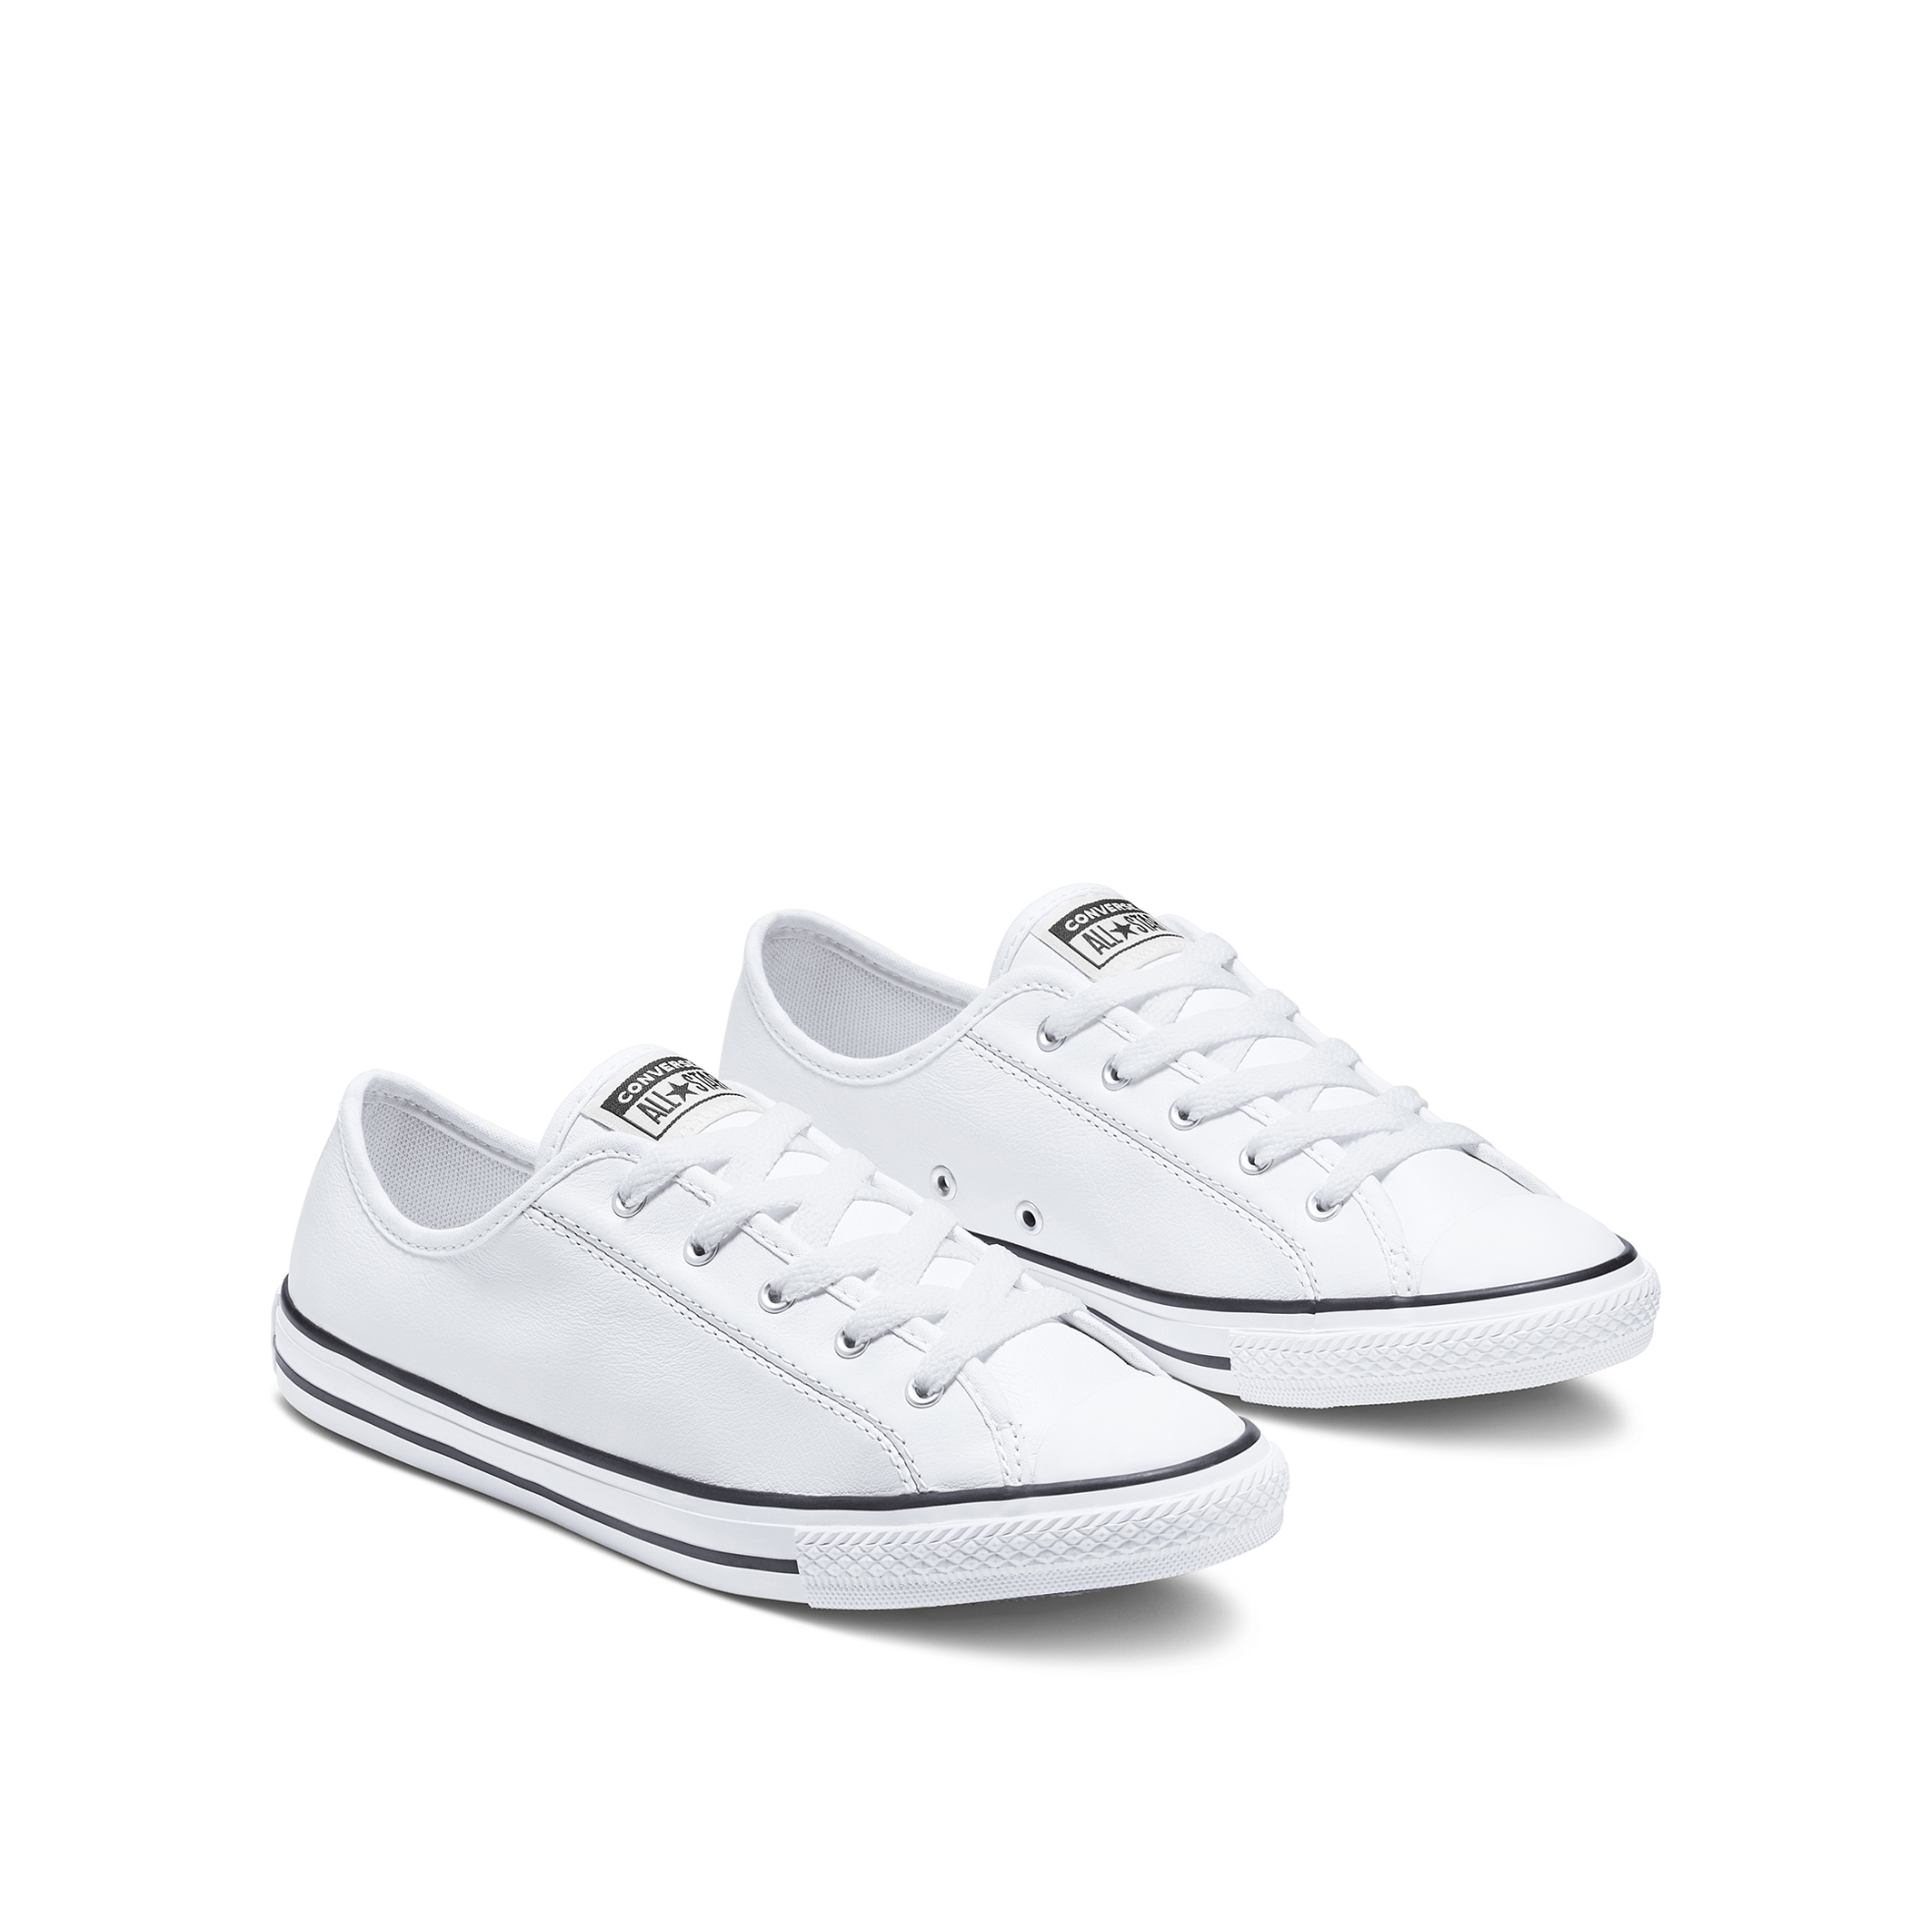 converse dainty leather trainers